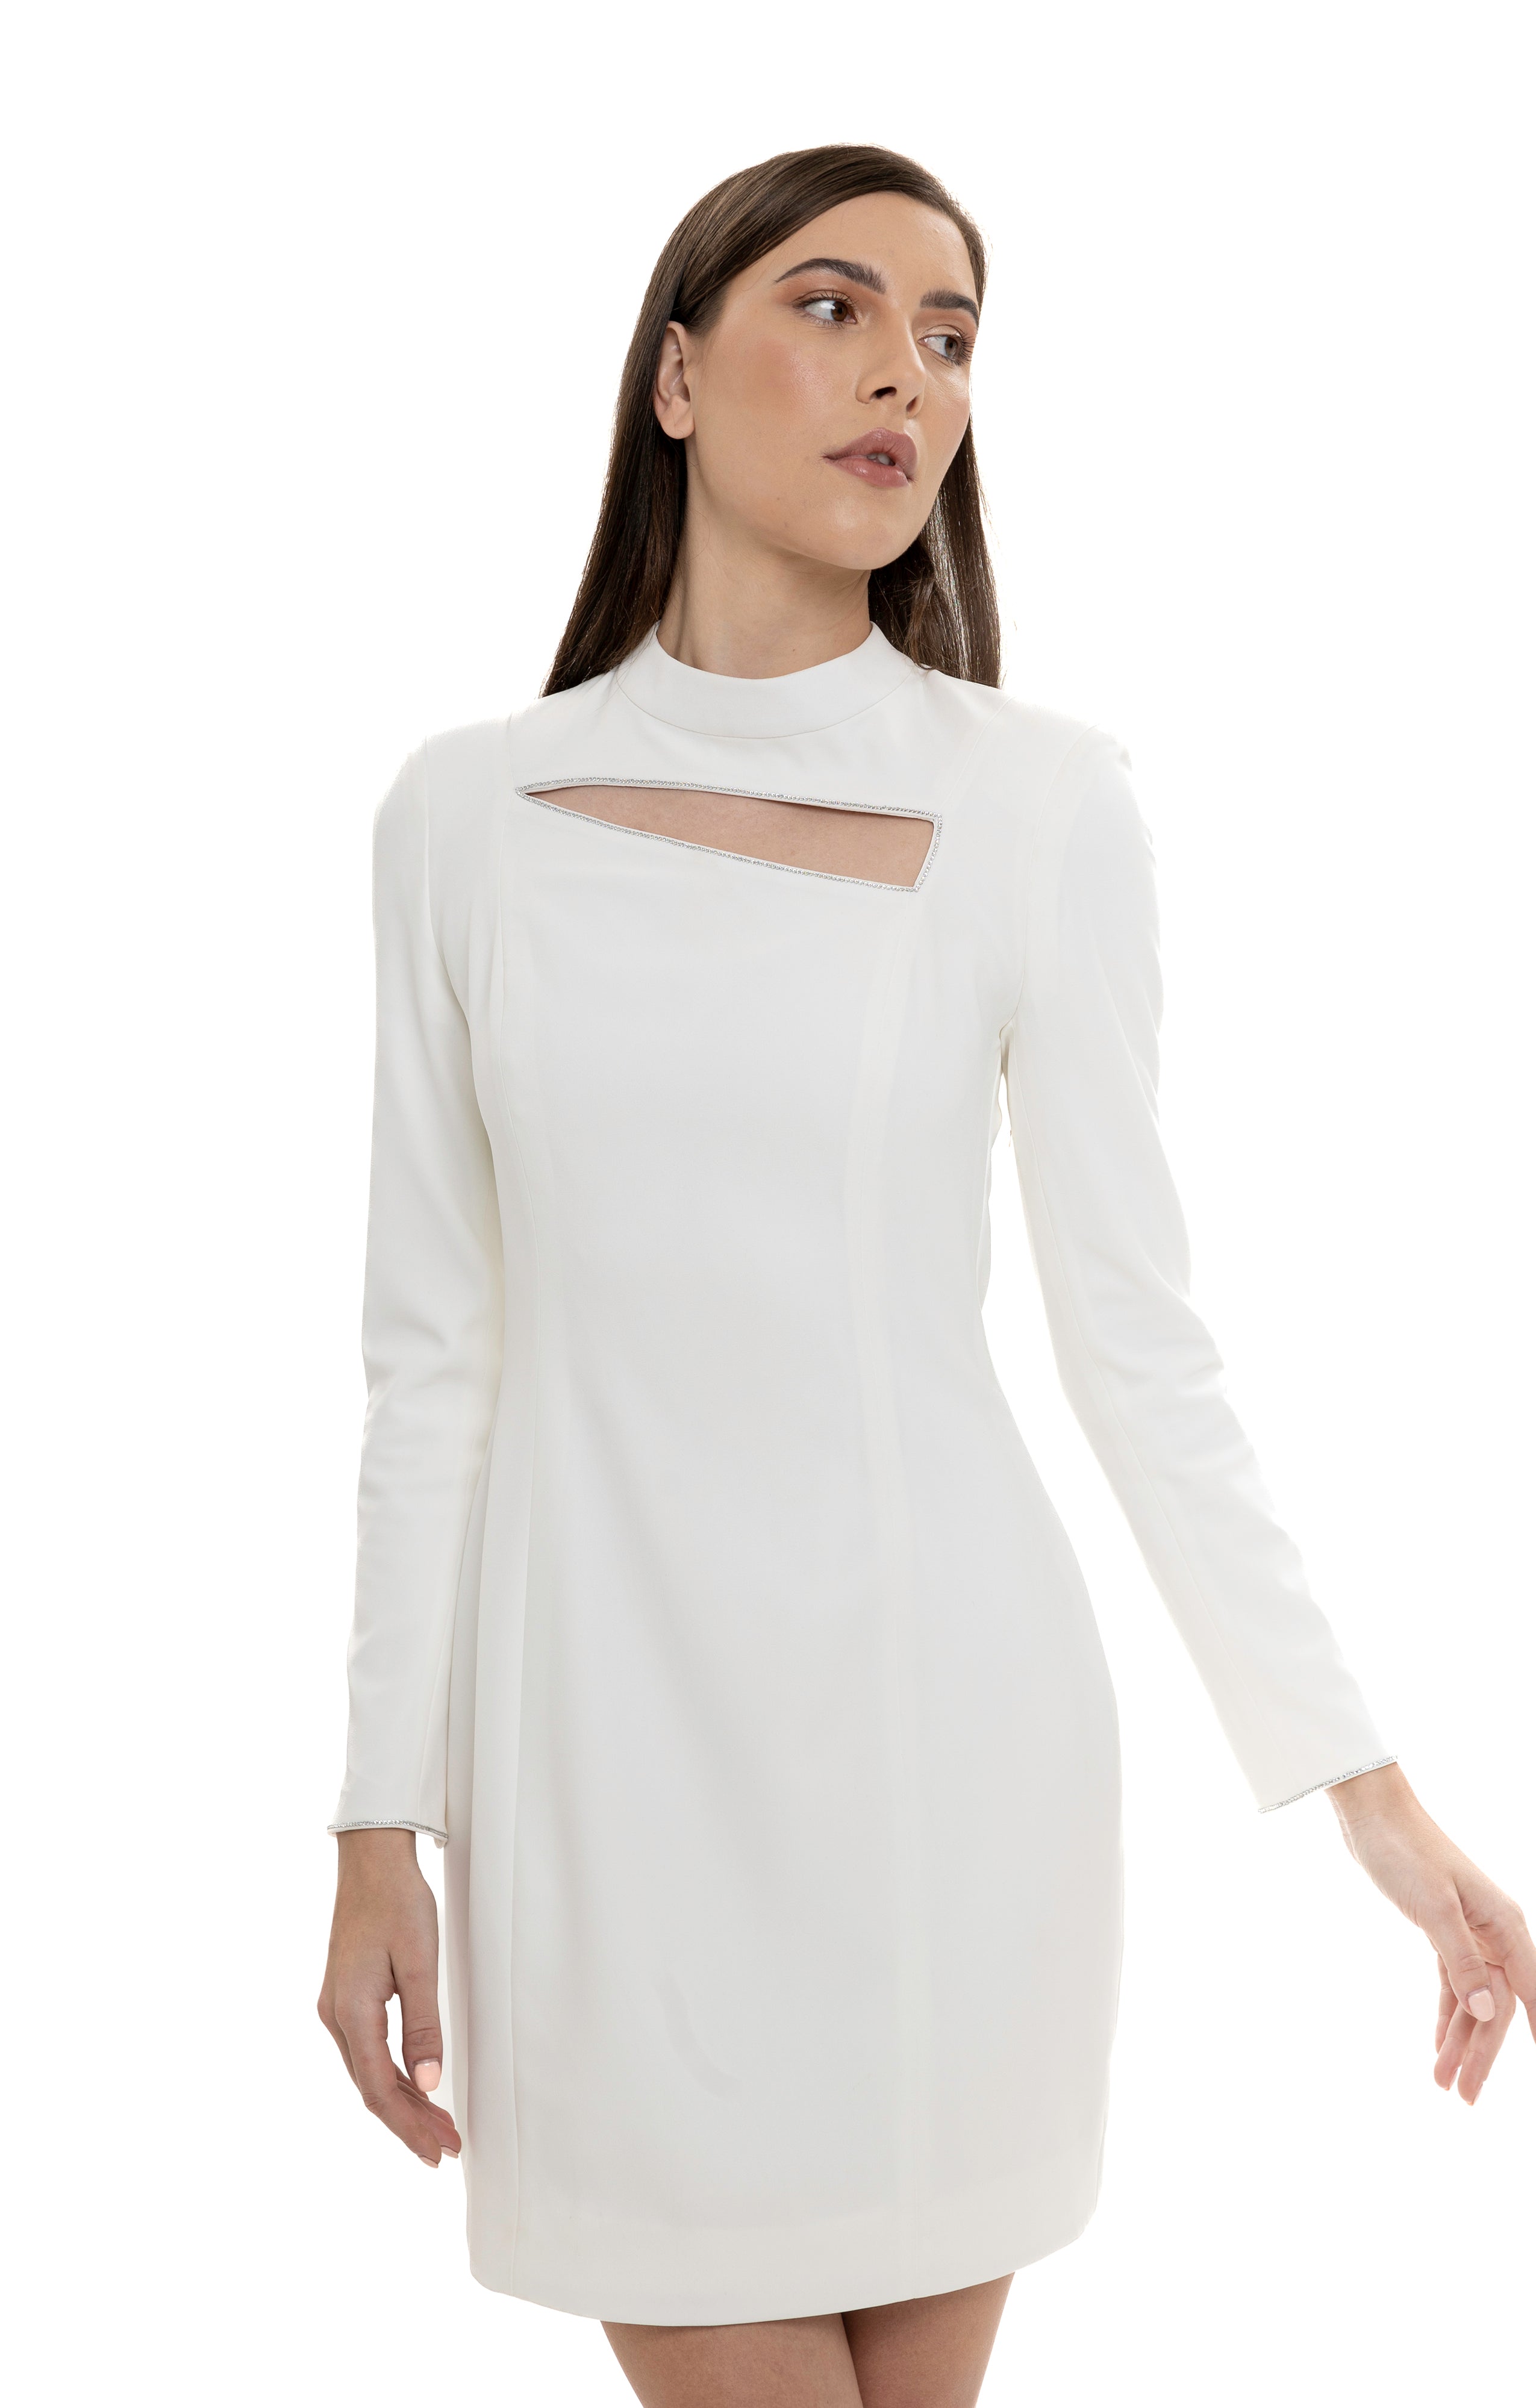 The Lili Fitted Dress By Lili Blanc